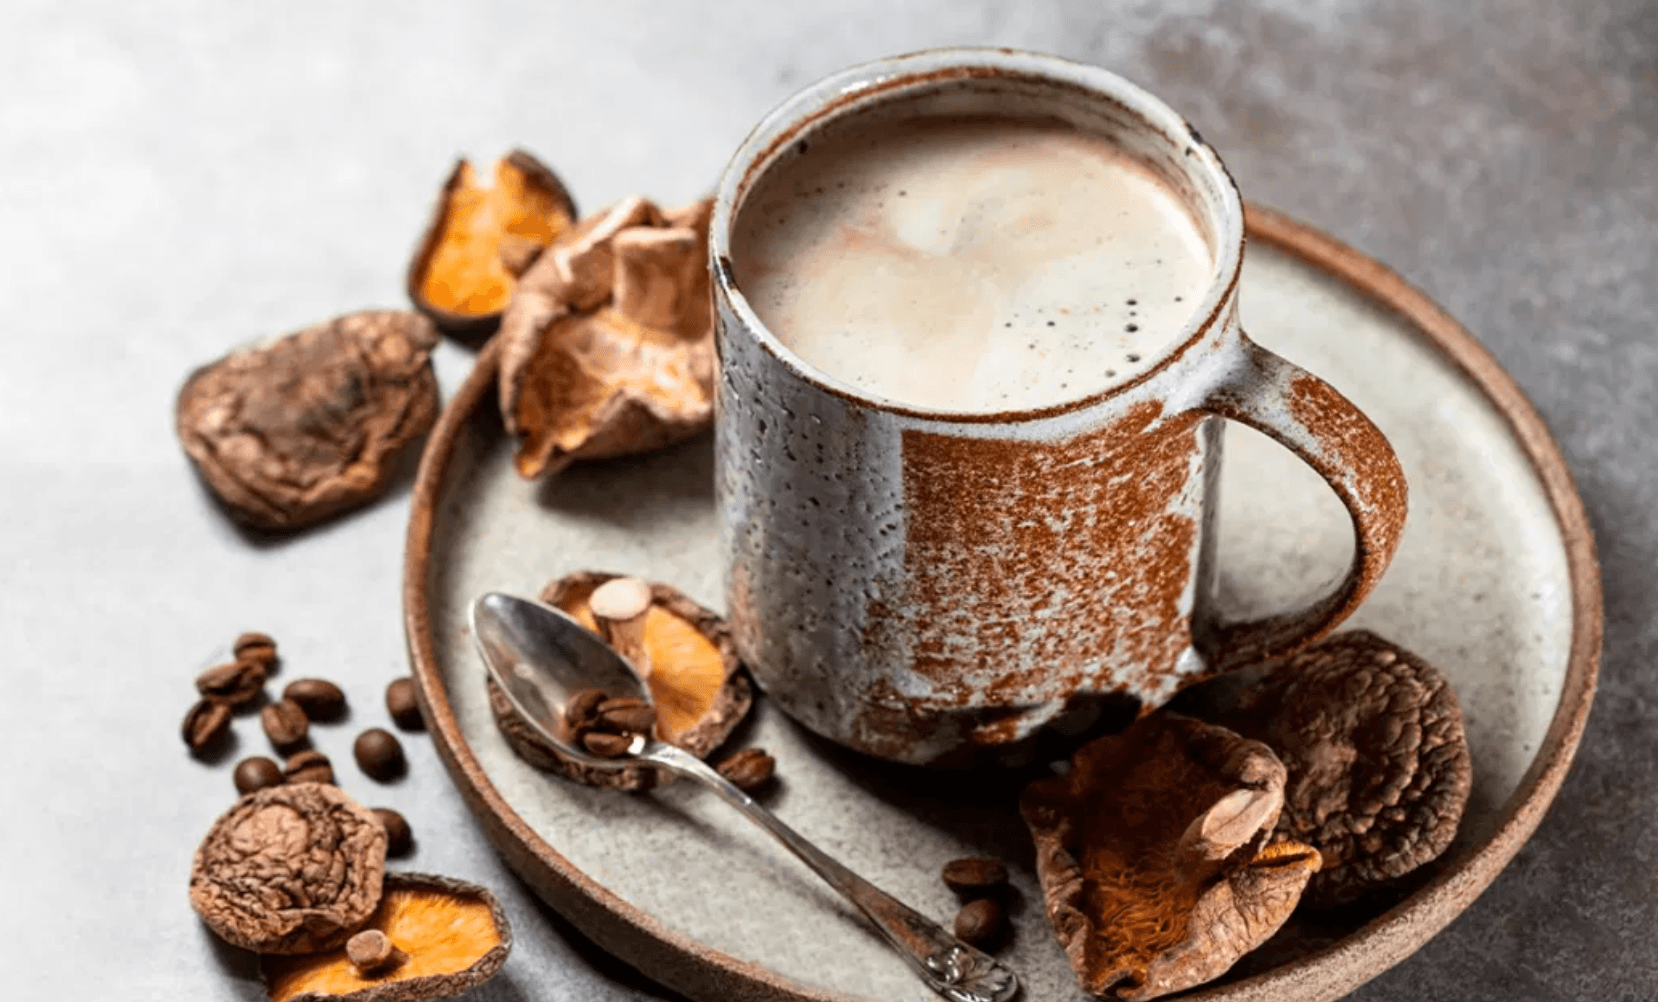 Where to buy mushroom coffee in the UK and what is Moksha? - No Ordinary Moments